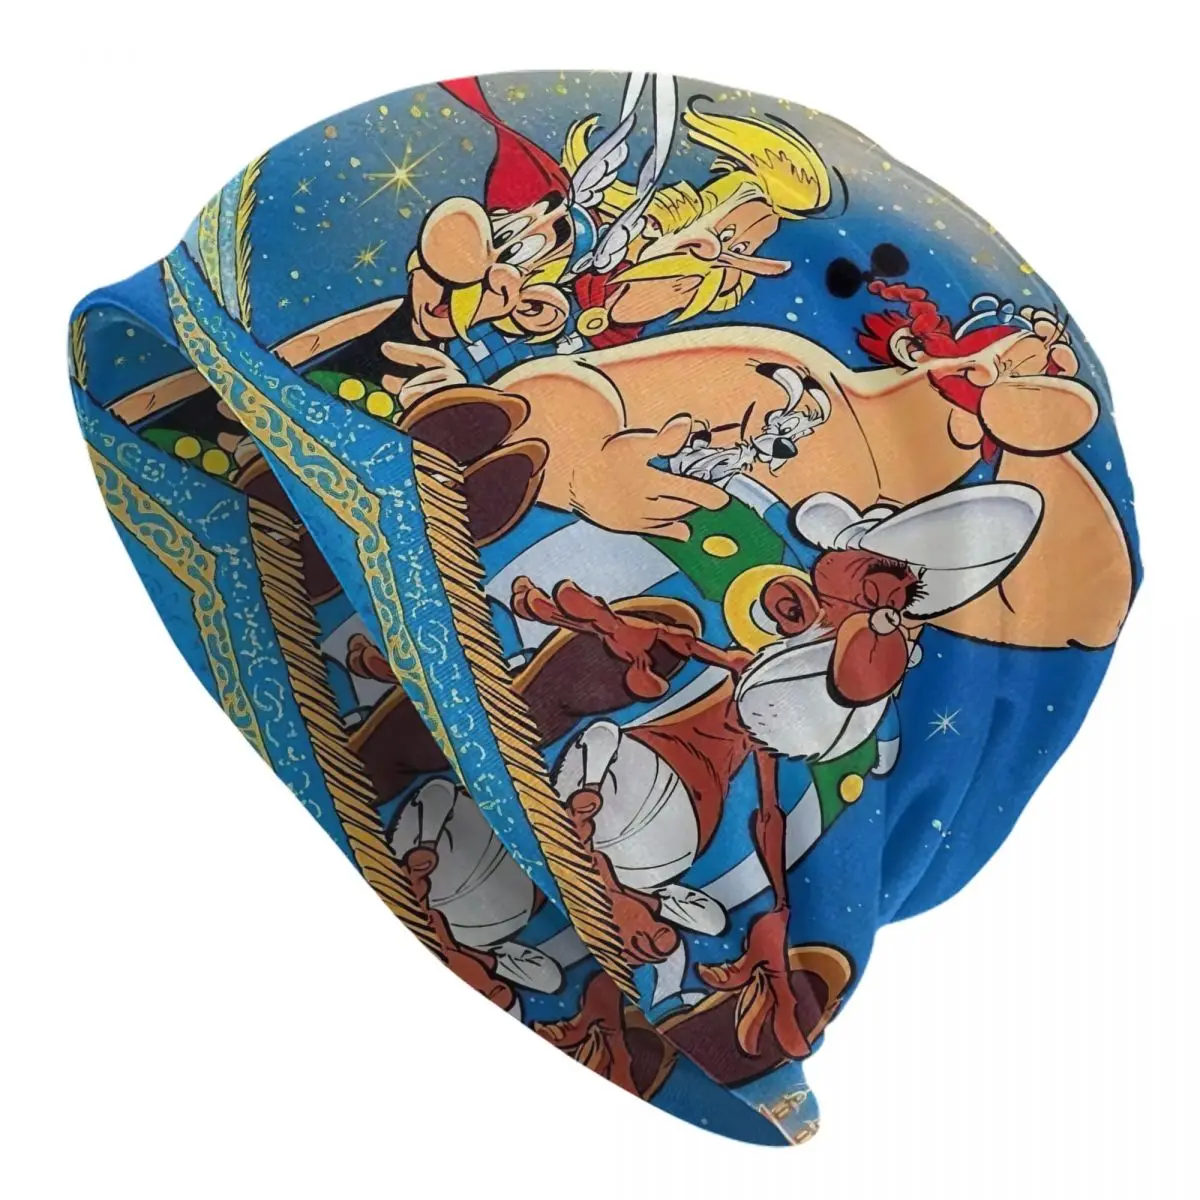 Asterix Obelix Adult Men's Women's Knit Hat Keep warm winter Funny knitted hat